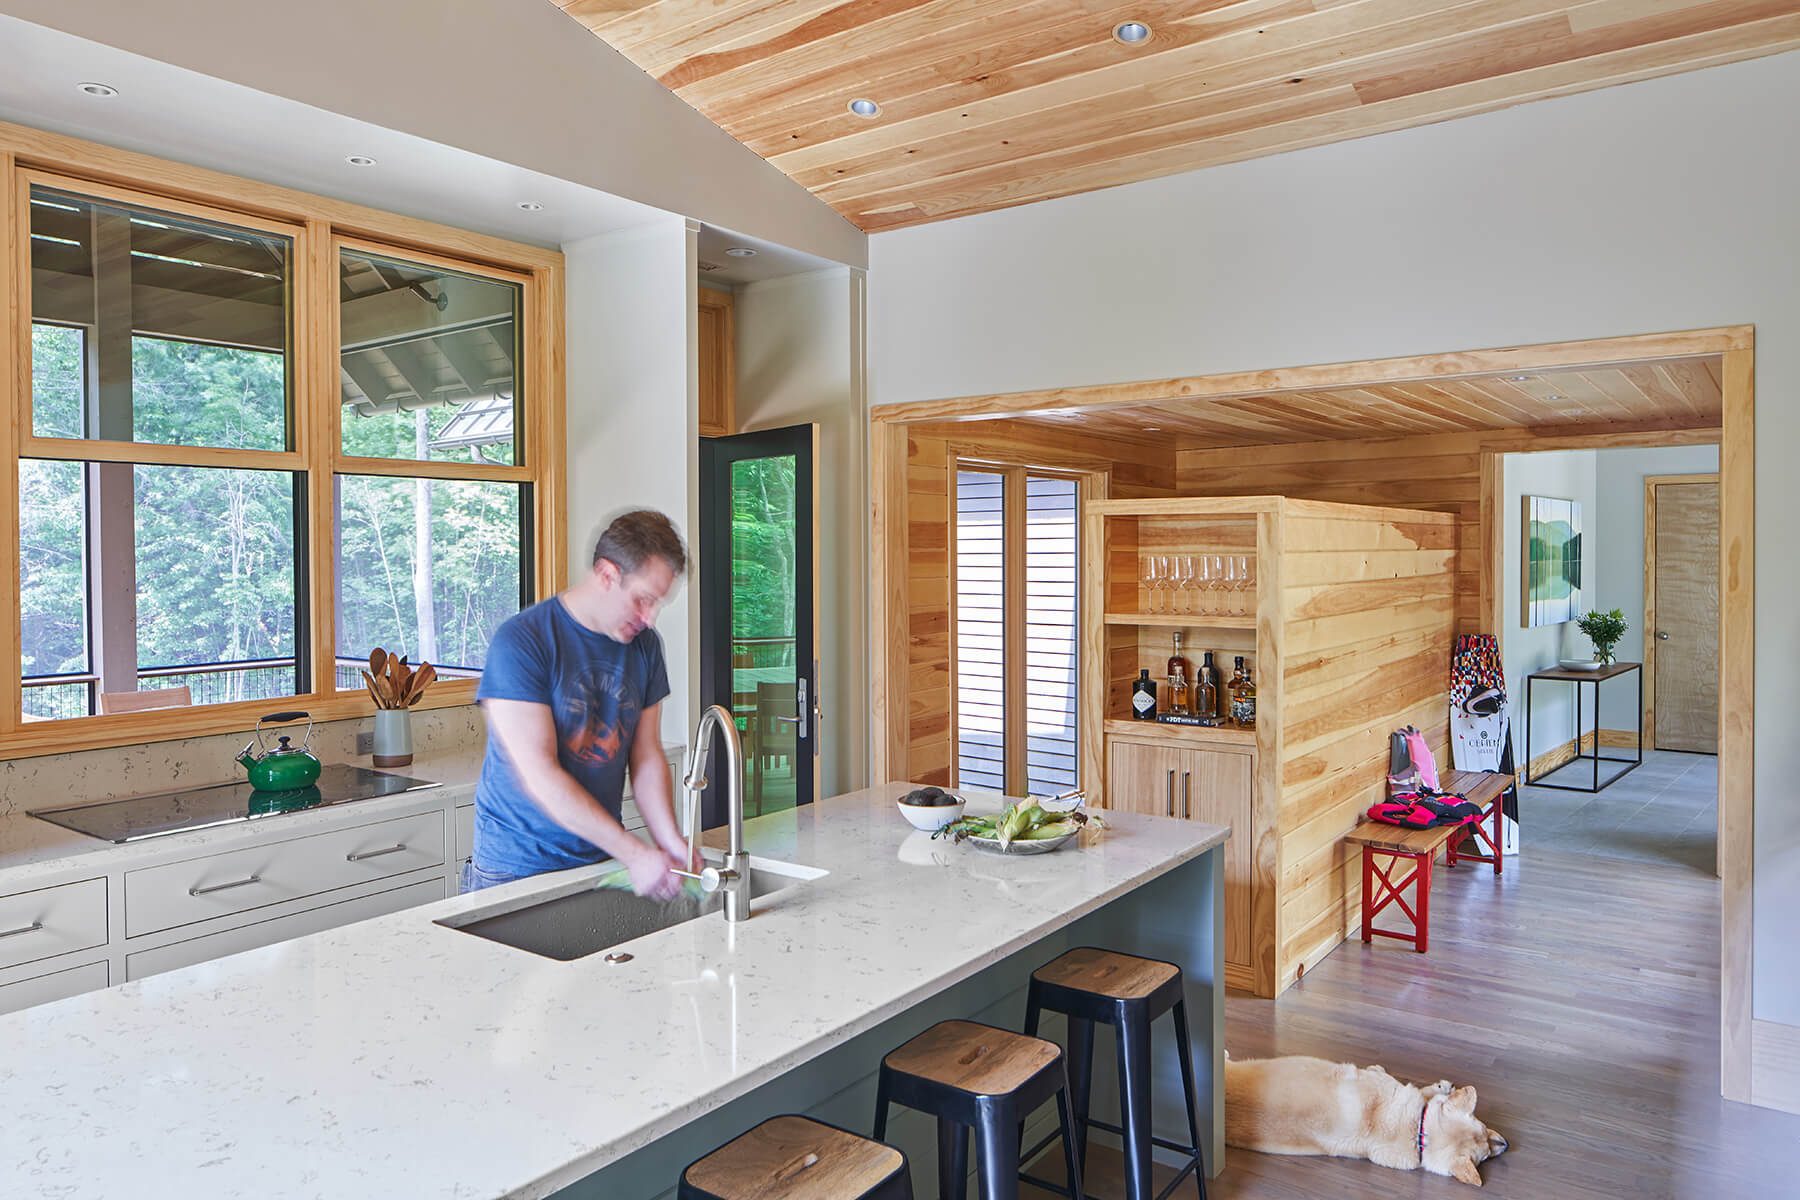 The Camp Campos kitchen and cooking area architectural home design in Western North Carolina